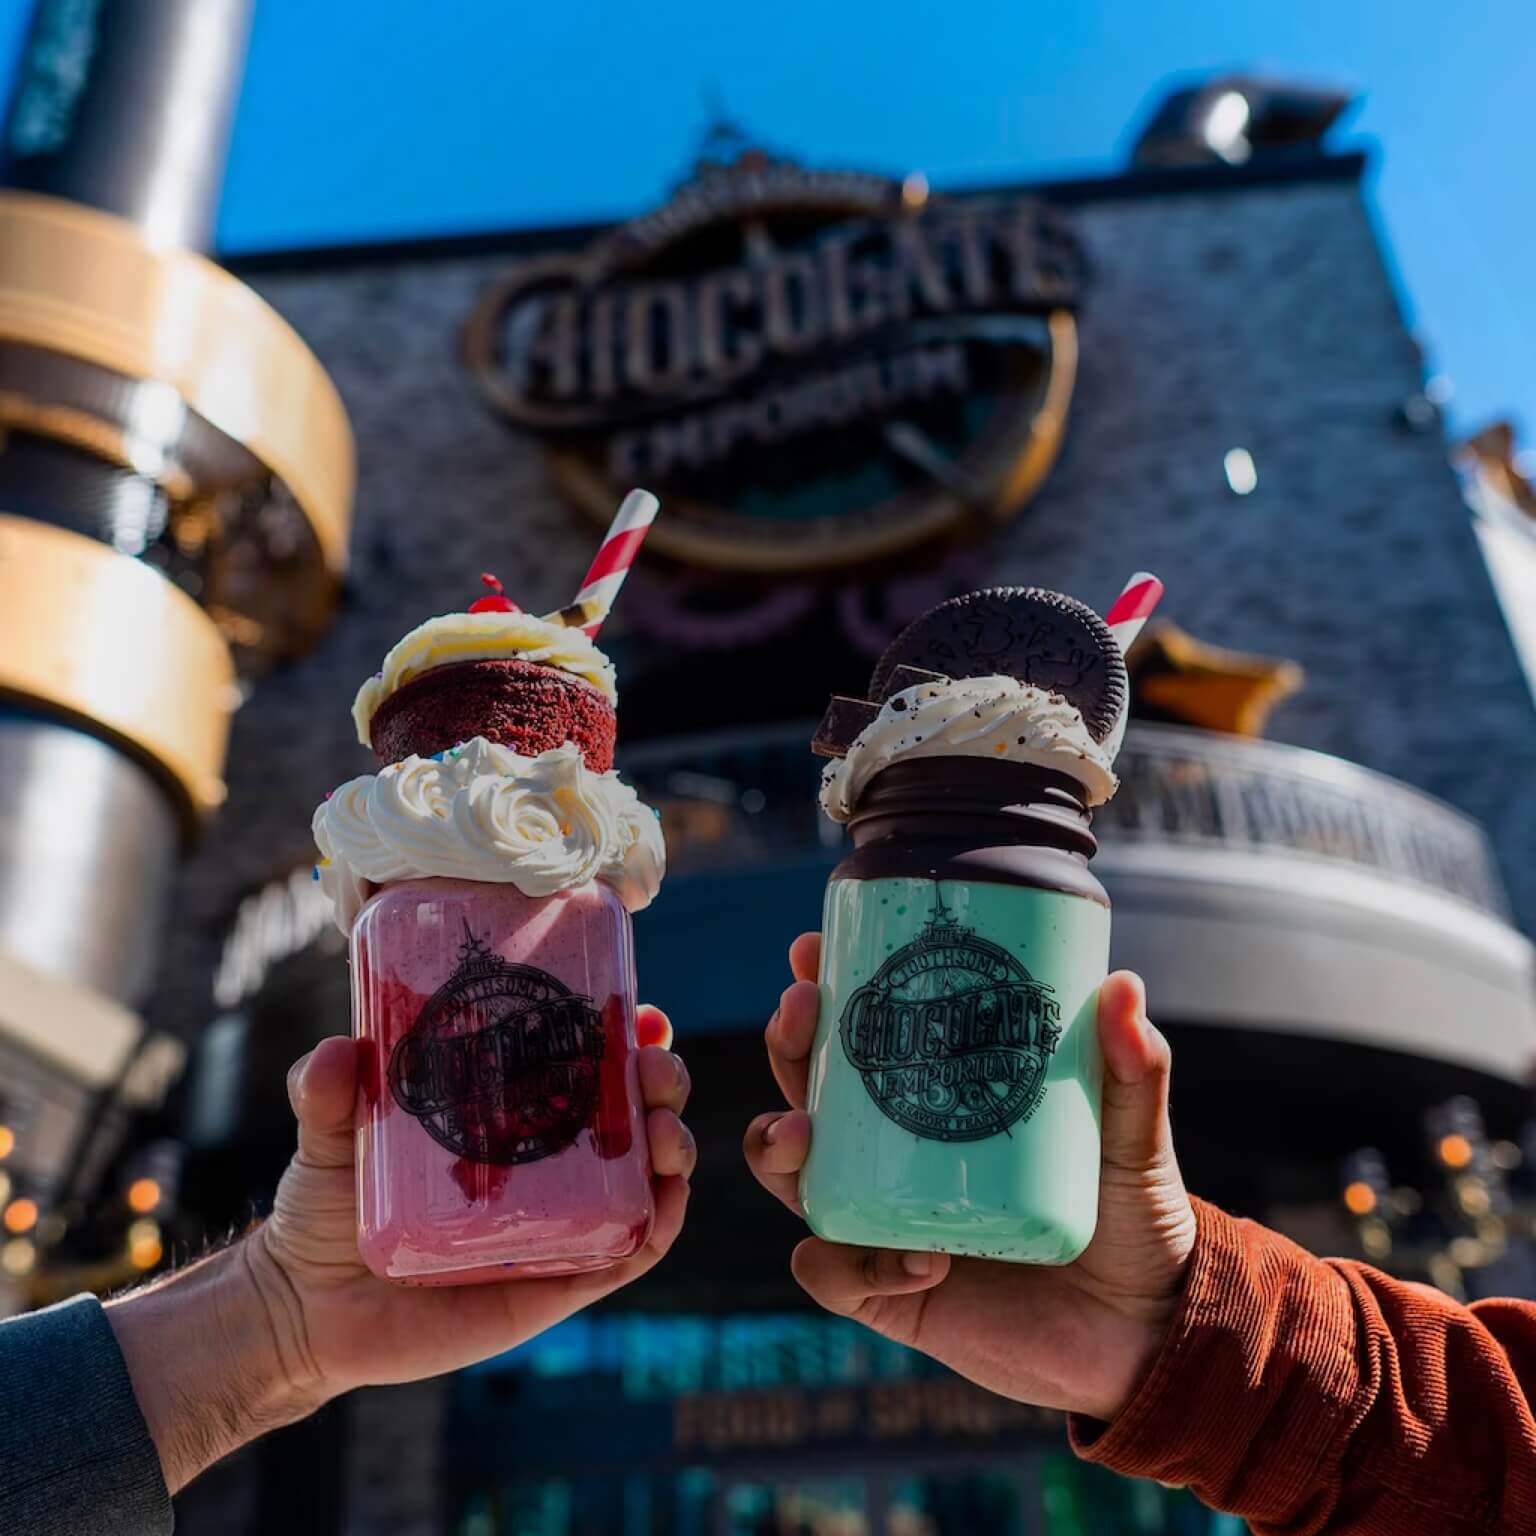 Two hands holding milkshakes in front of the exterior entrance sign to The Toothsome Chocolate Emporium & Savory Feast Kitchen.